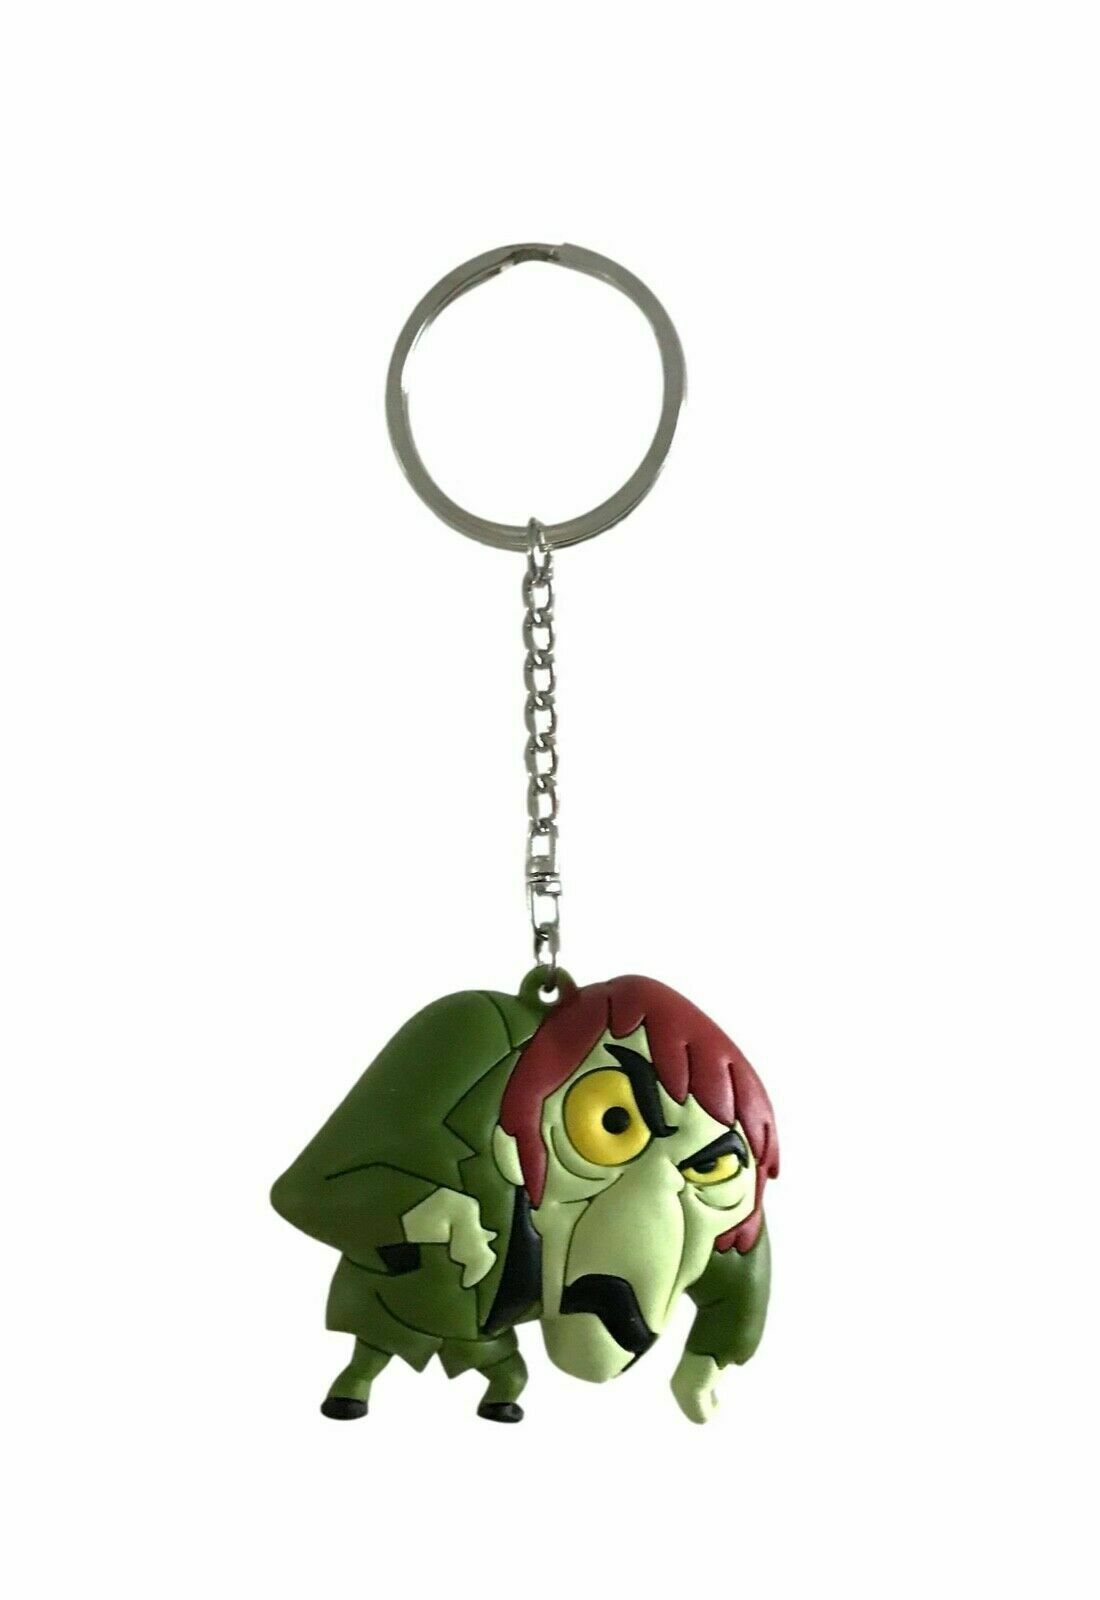 Scooby Doo The Creeper 3d Vinyl Keychain Keyring Backpack Bag Tag